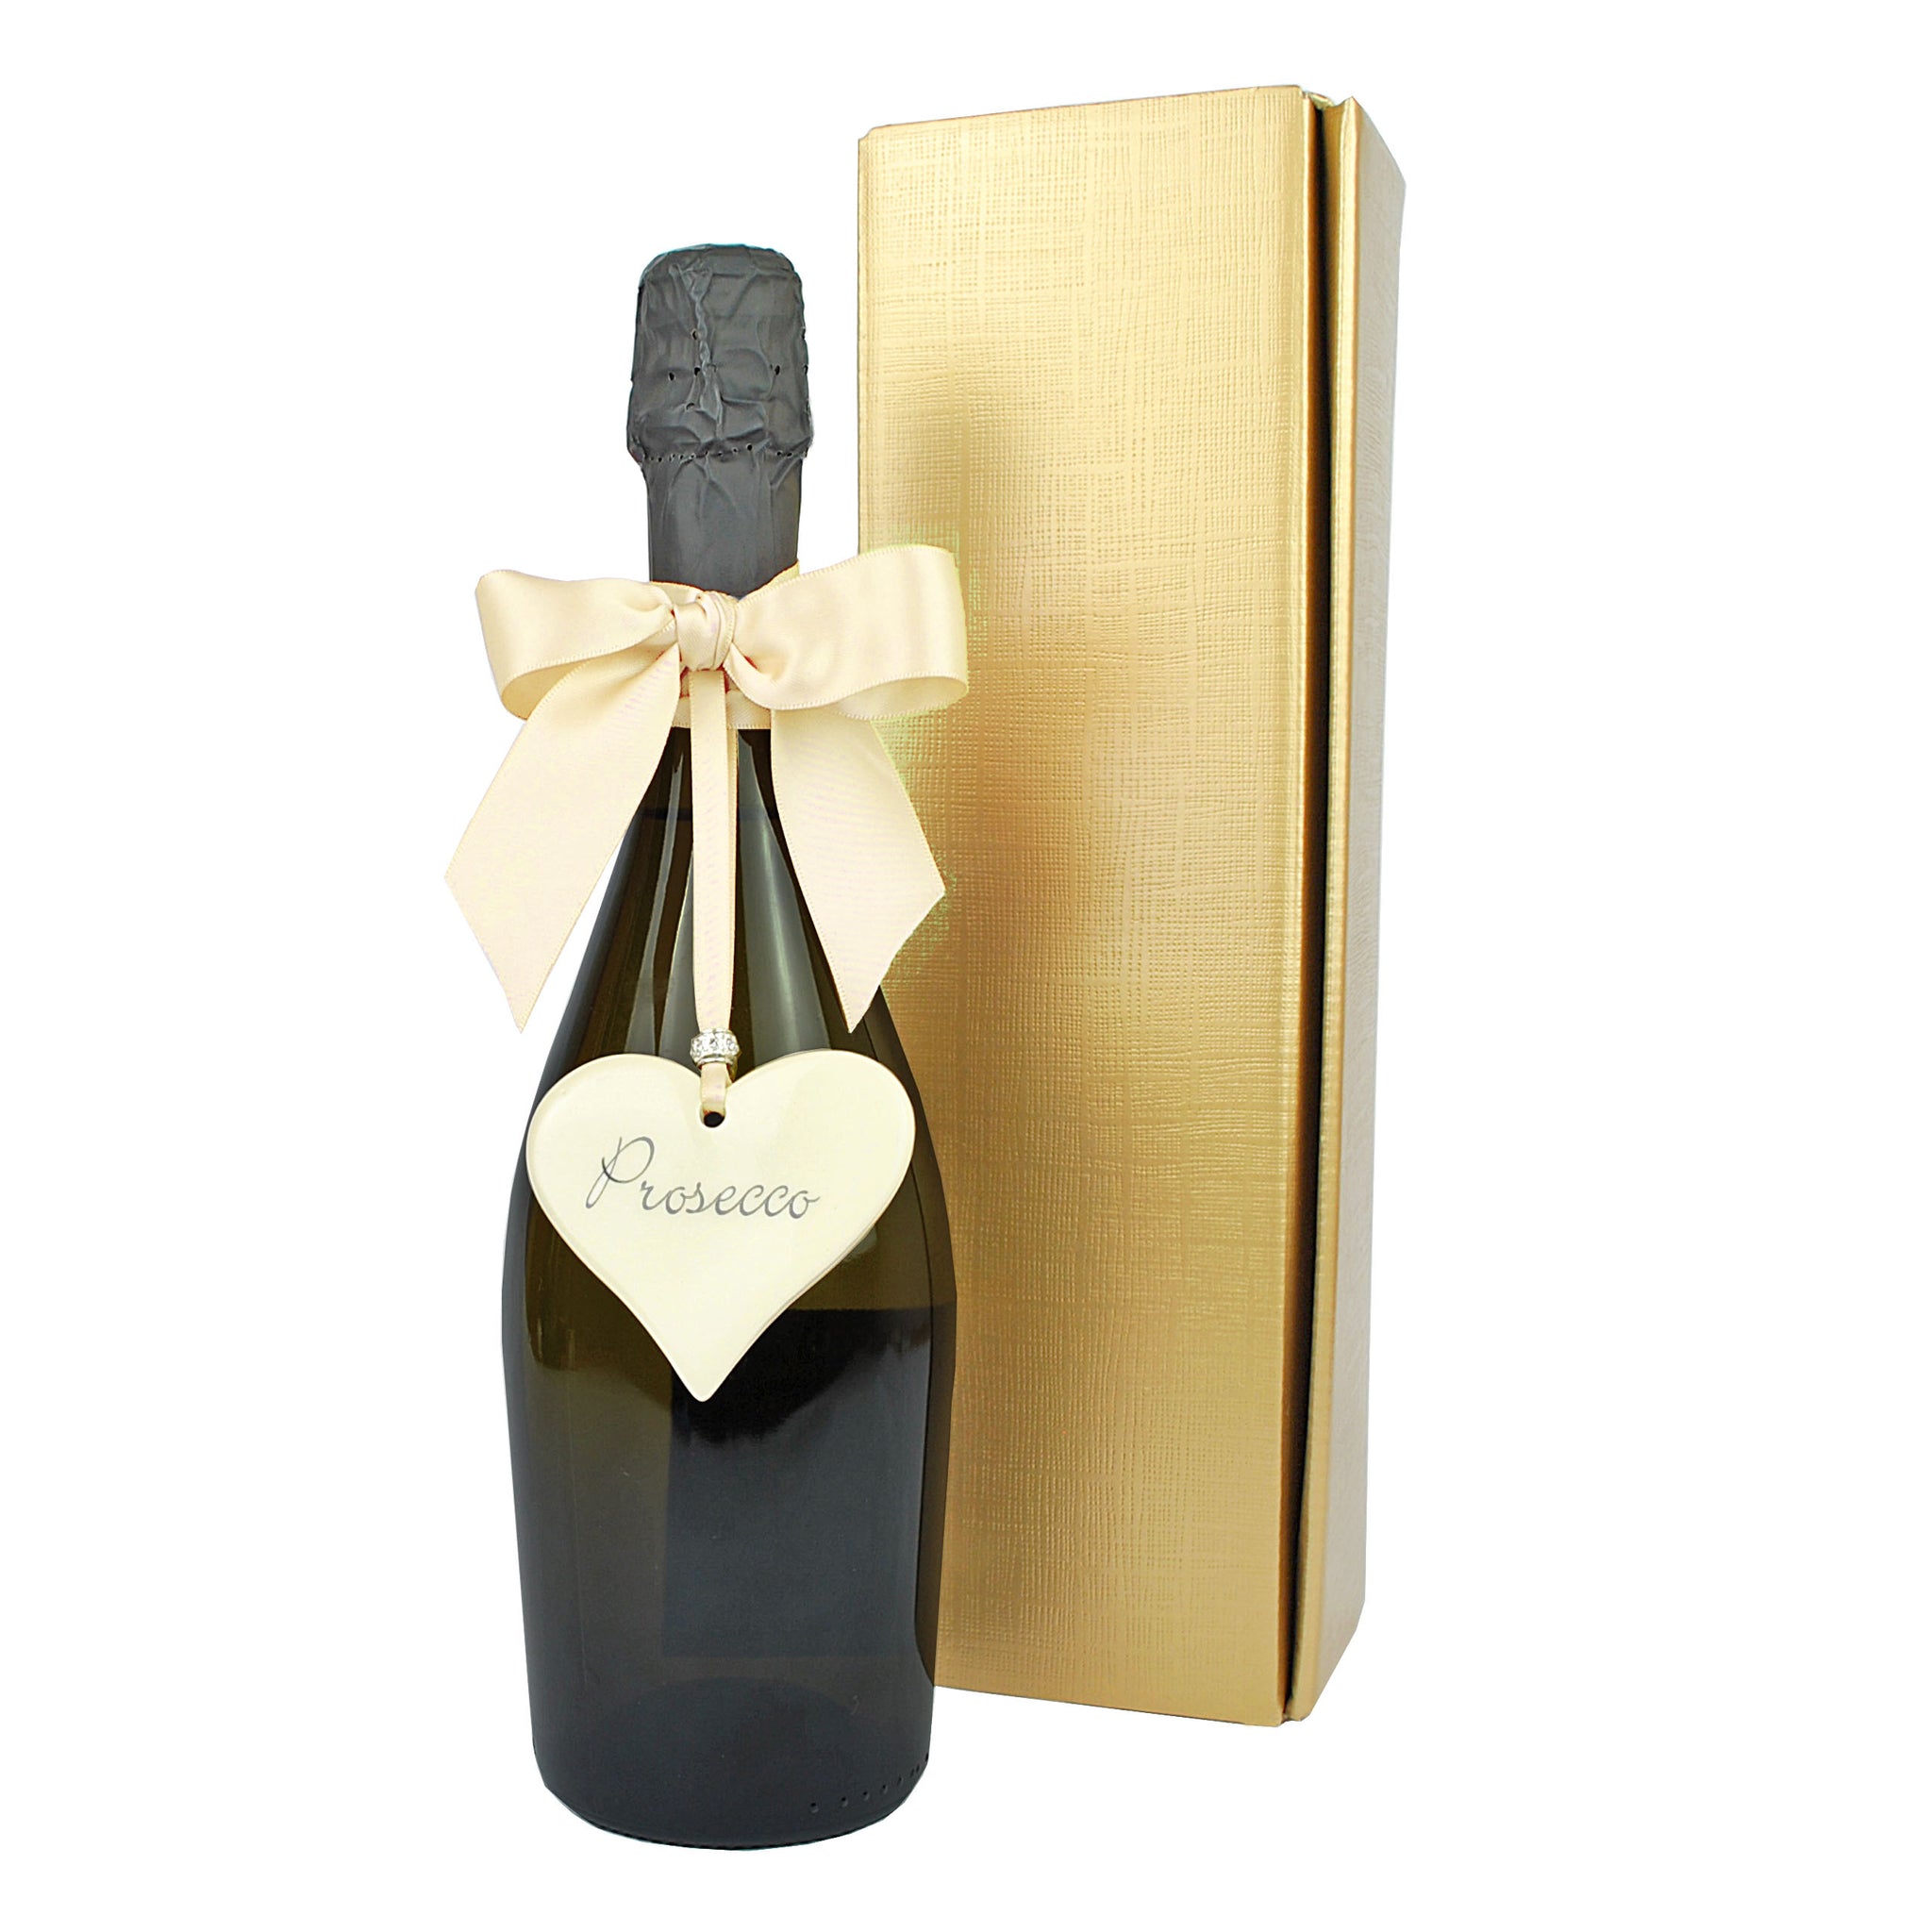 Love Prosecco with a ceramic heart presented in a gold gift box